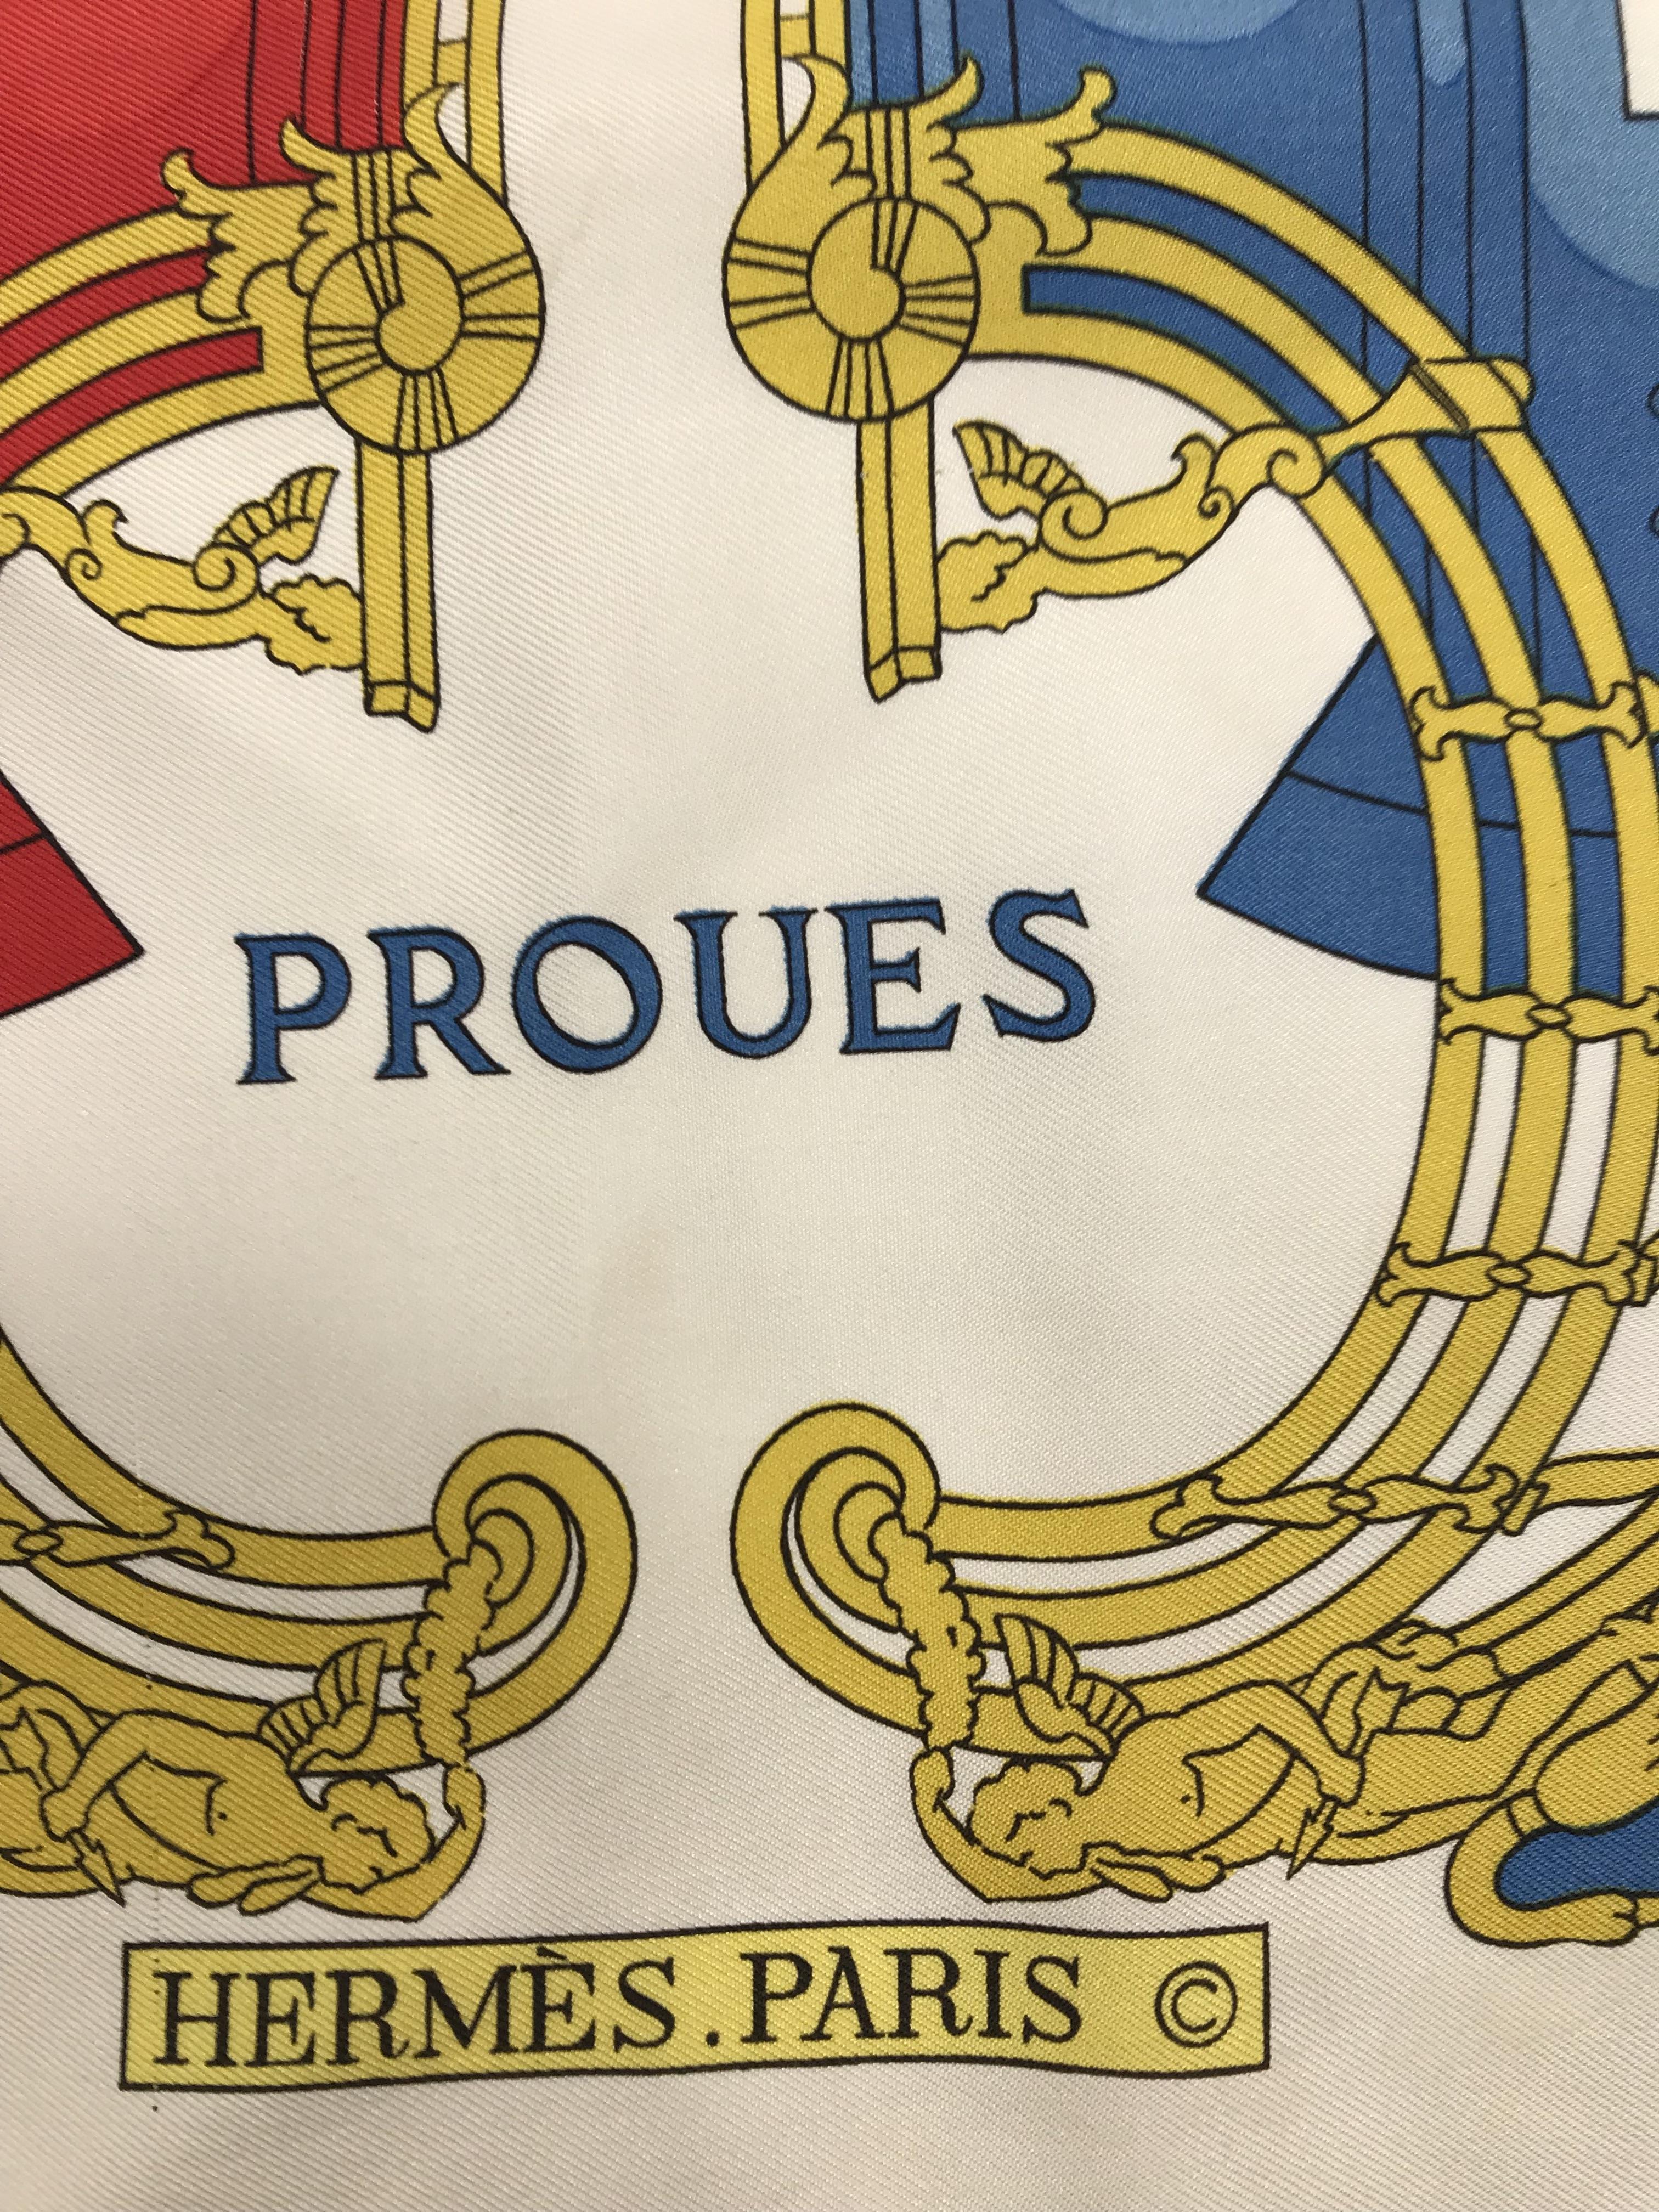 A Hermès silk scarf "Proues" by Philippe - Image 7 of 10